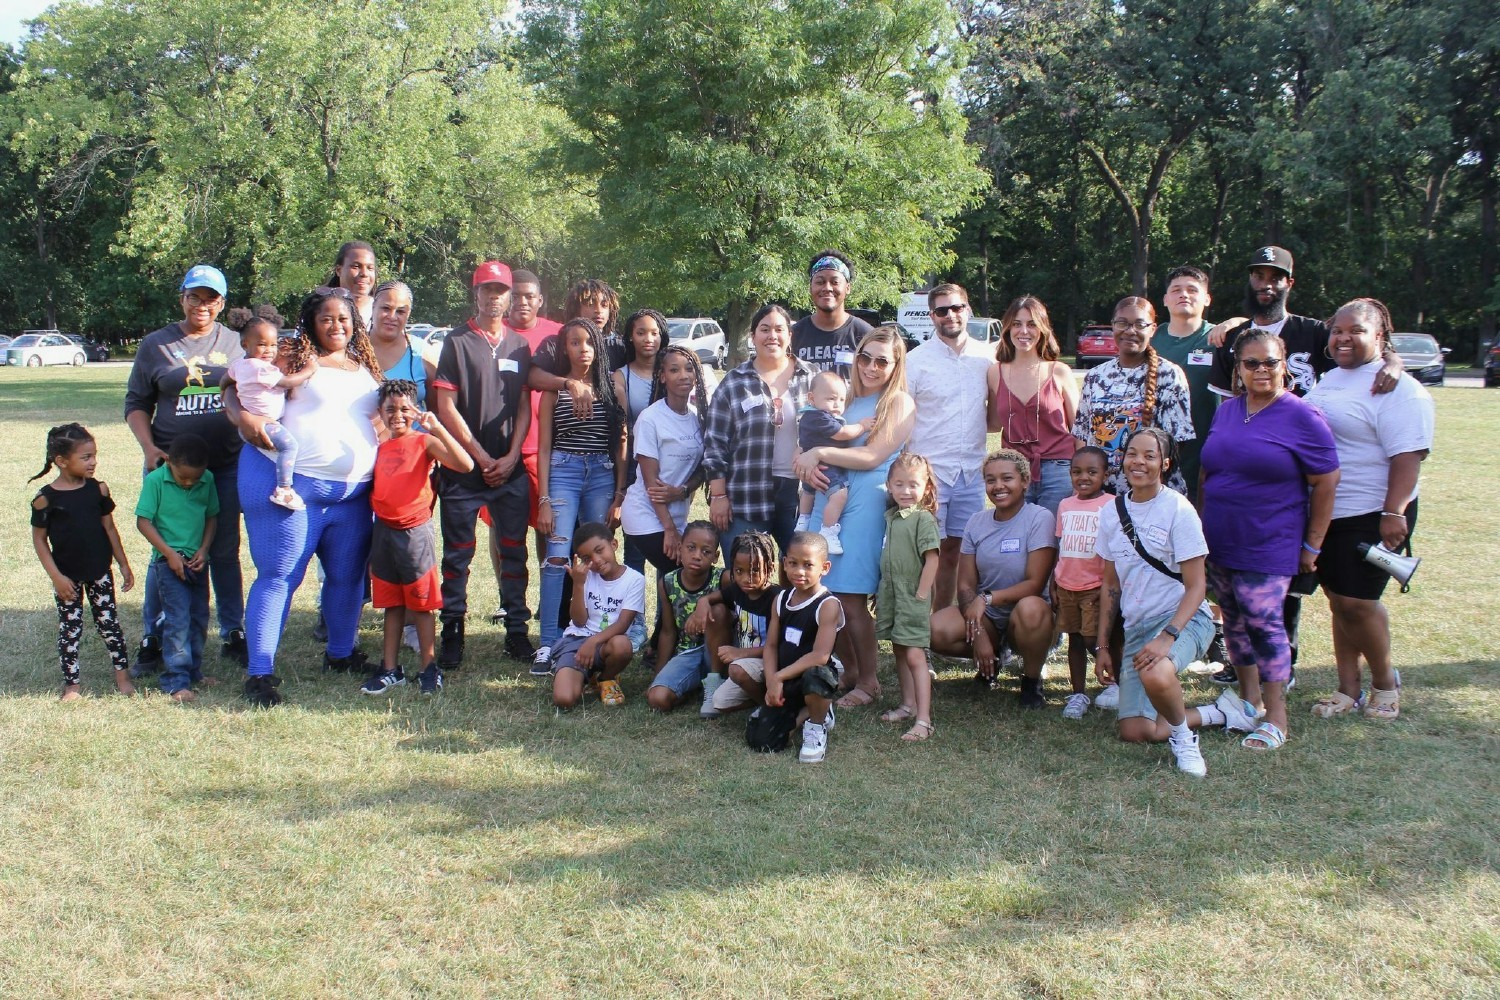 Our South Chicago team with family and friends at our company outing.